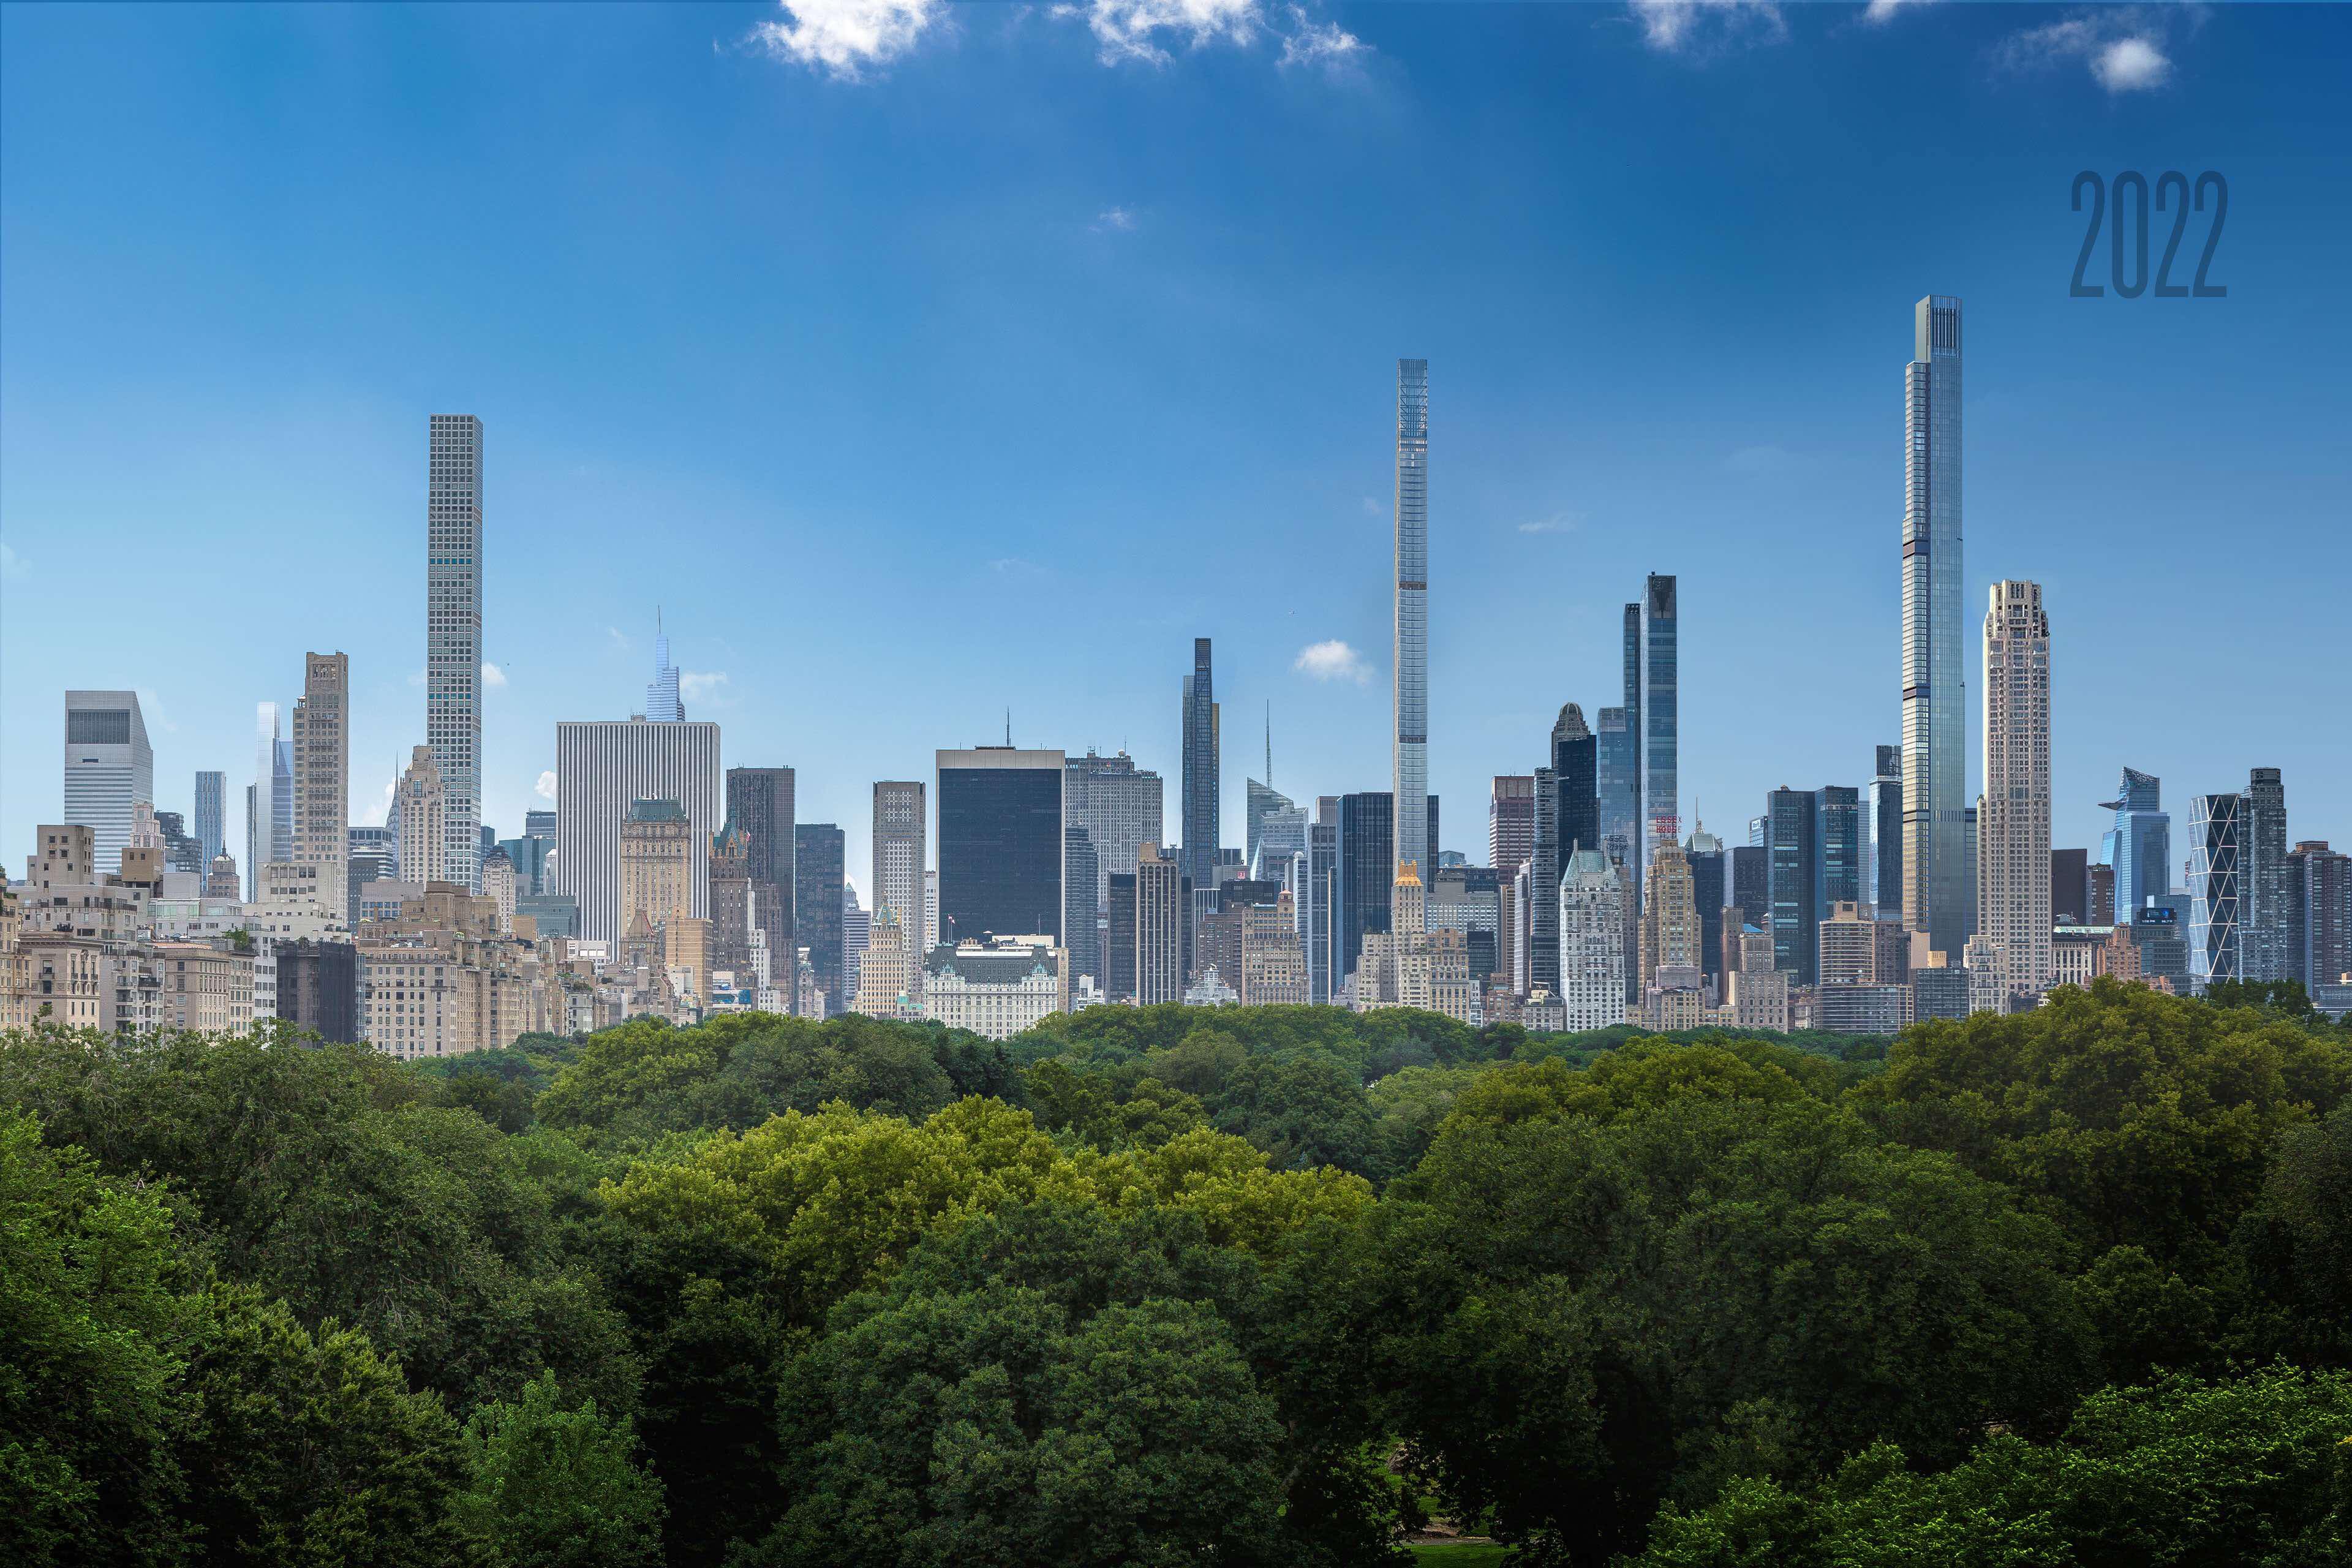 Central Park view in 2022, rendering by Jose Hernandez image by Andrew Campbell Nelson